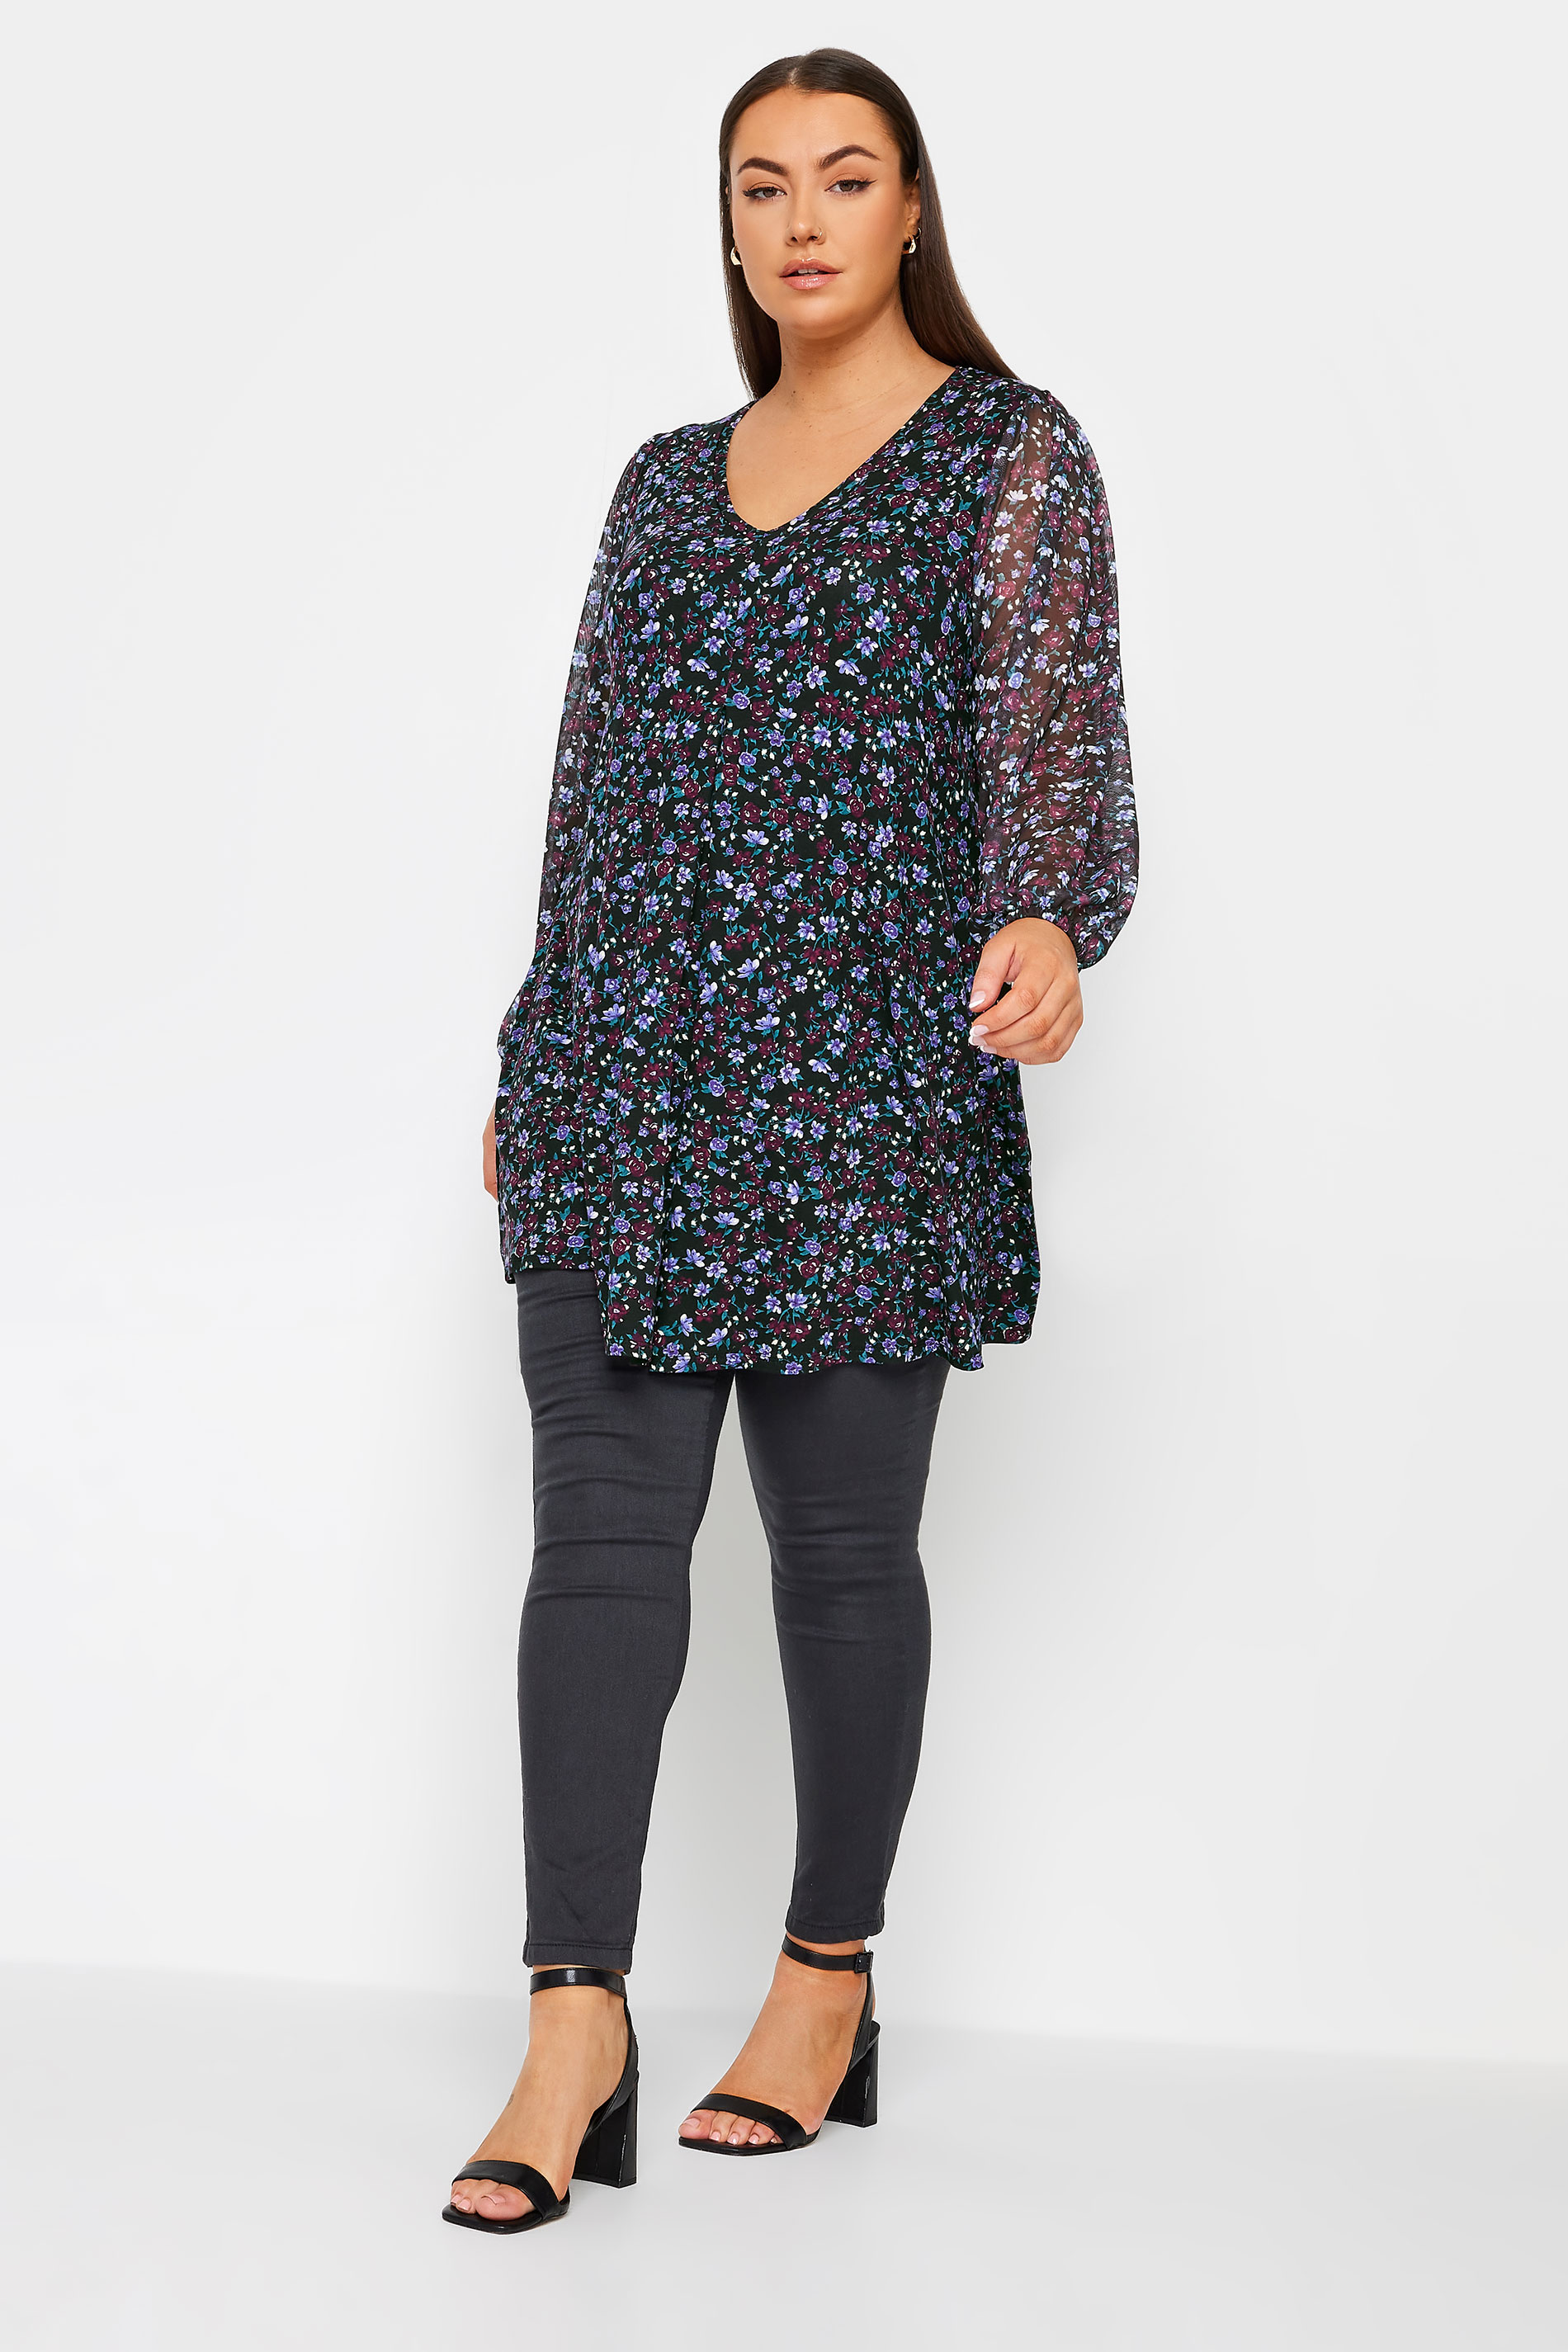 YOURS Plus Size Blue Floral Print Mesh Sleeve Top | Yours Clothing 2